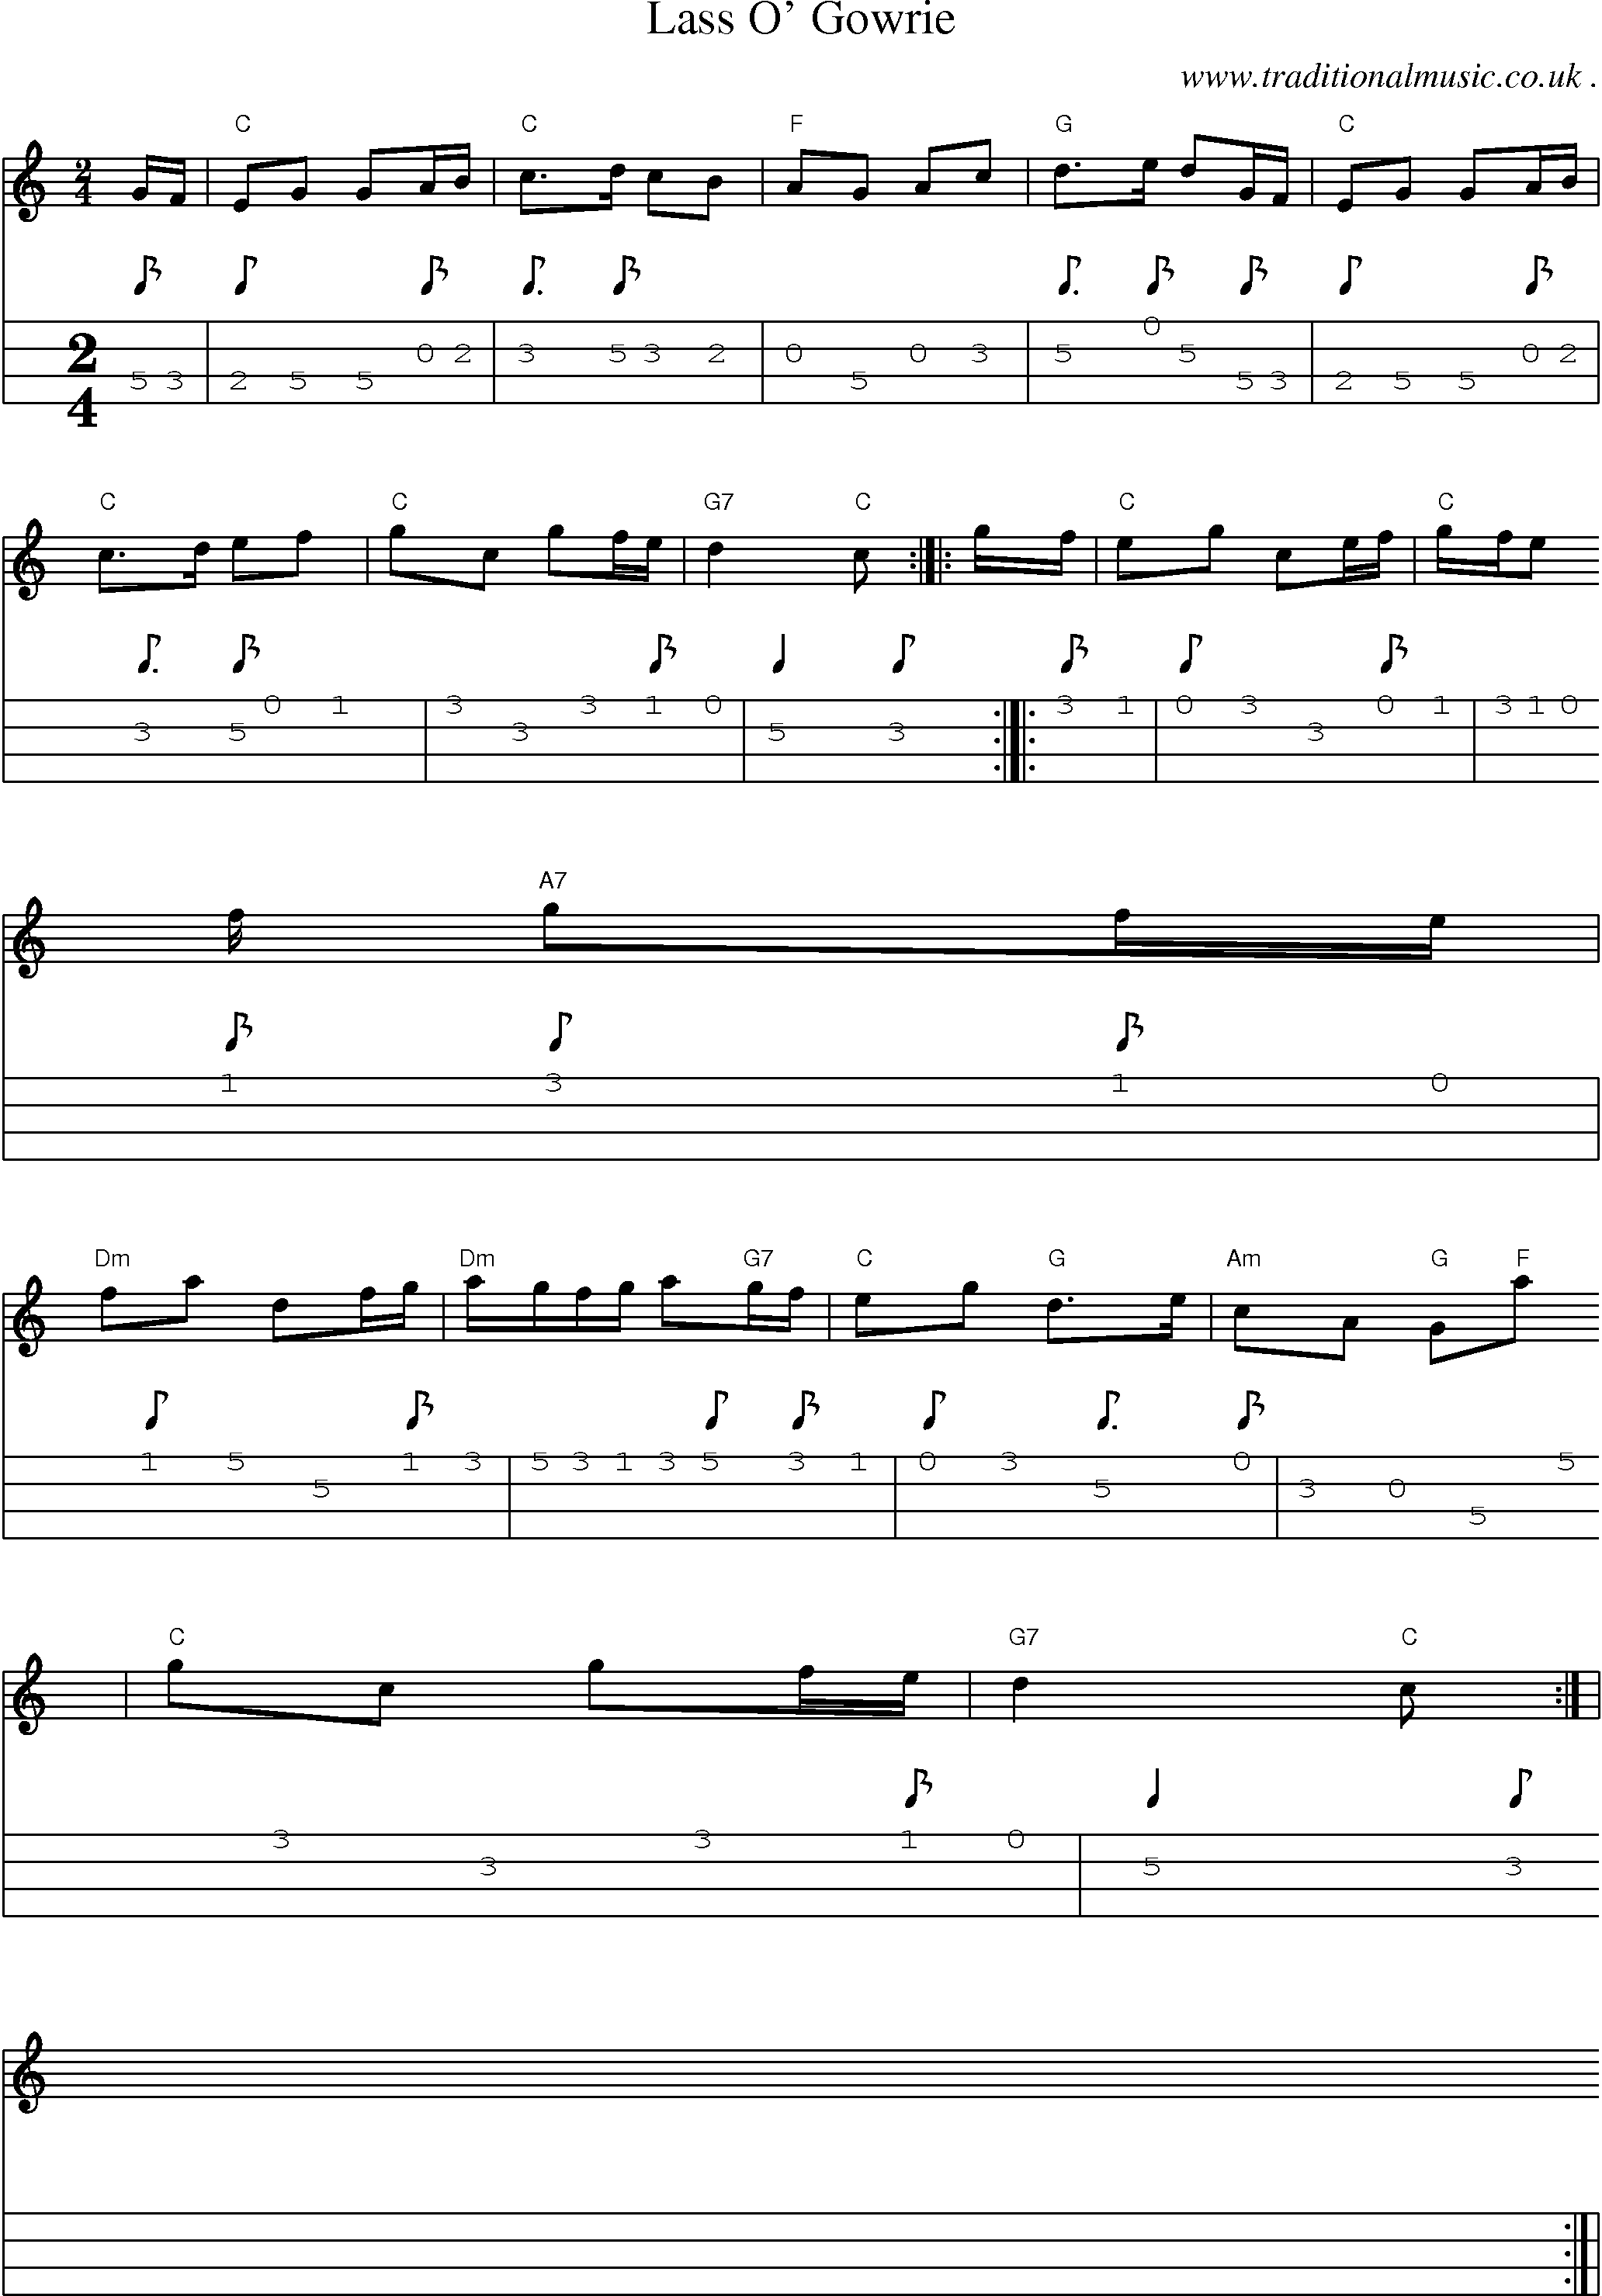 Sheet-music  score, Chords and Mandolin Tabs for Lass O Gowrie